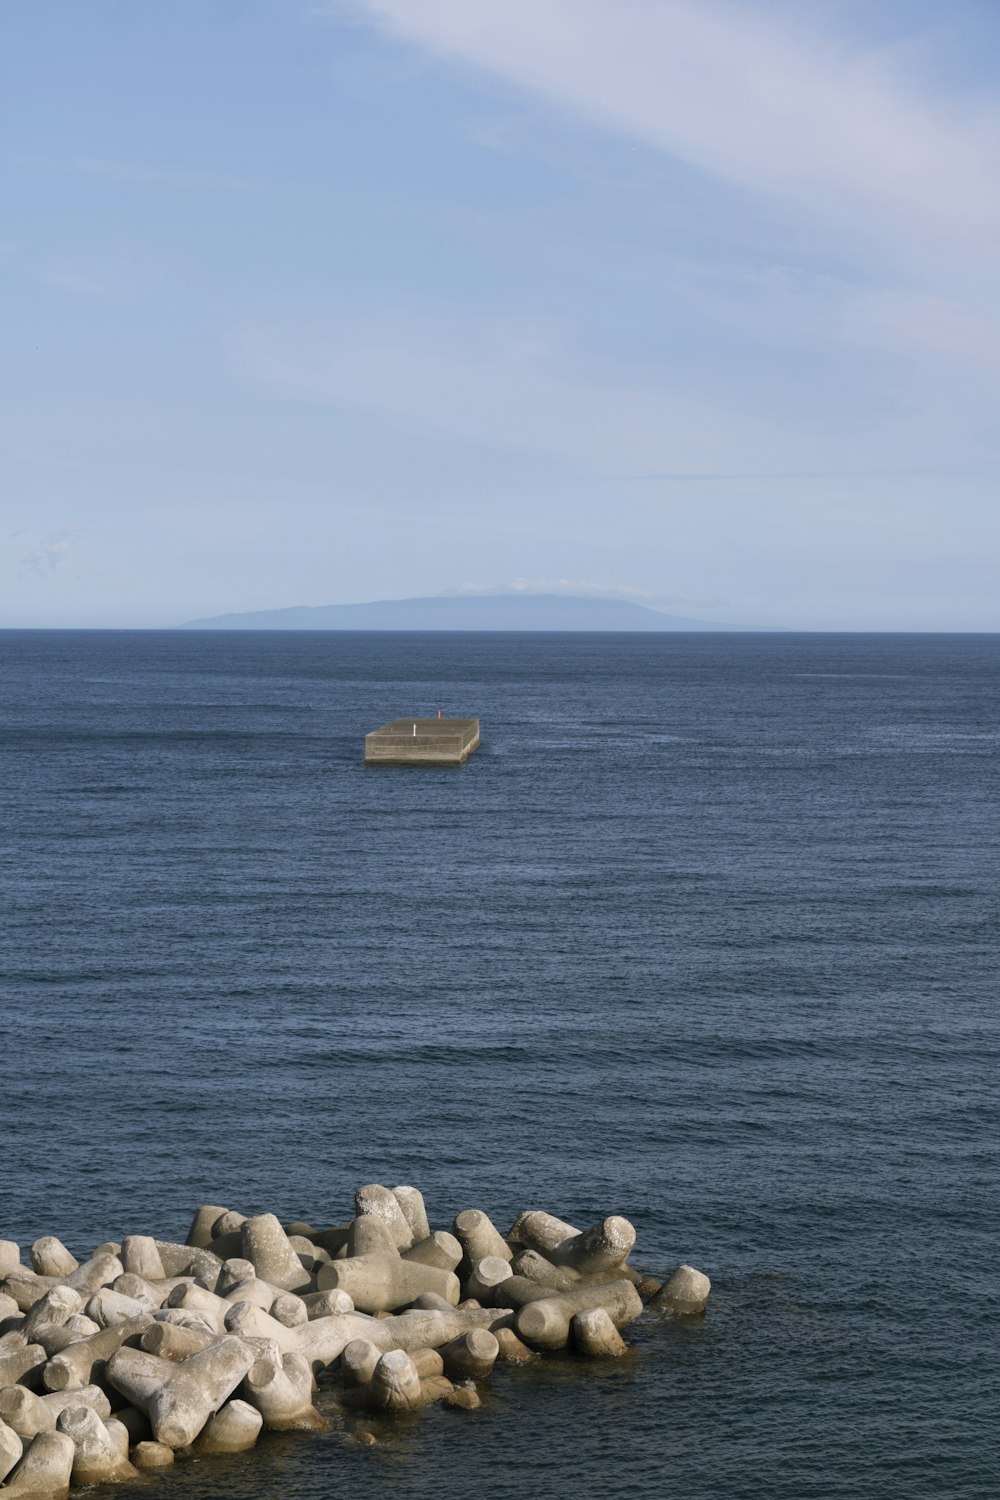 a boat is out on the water near rocks